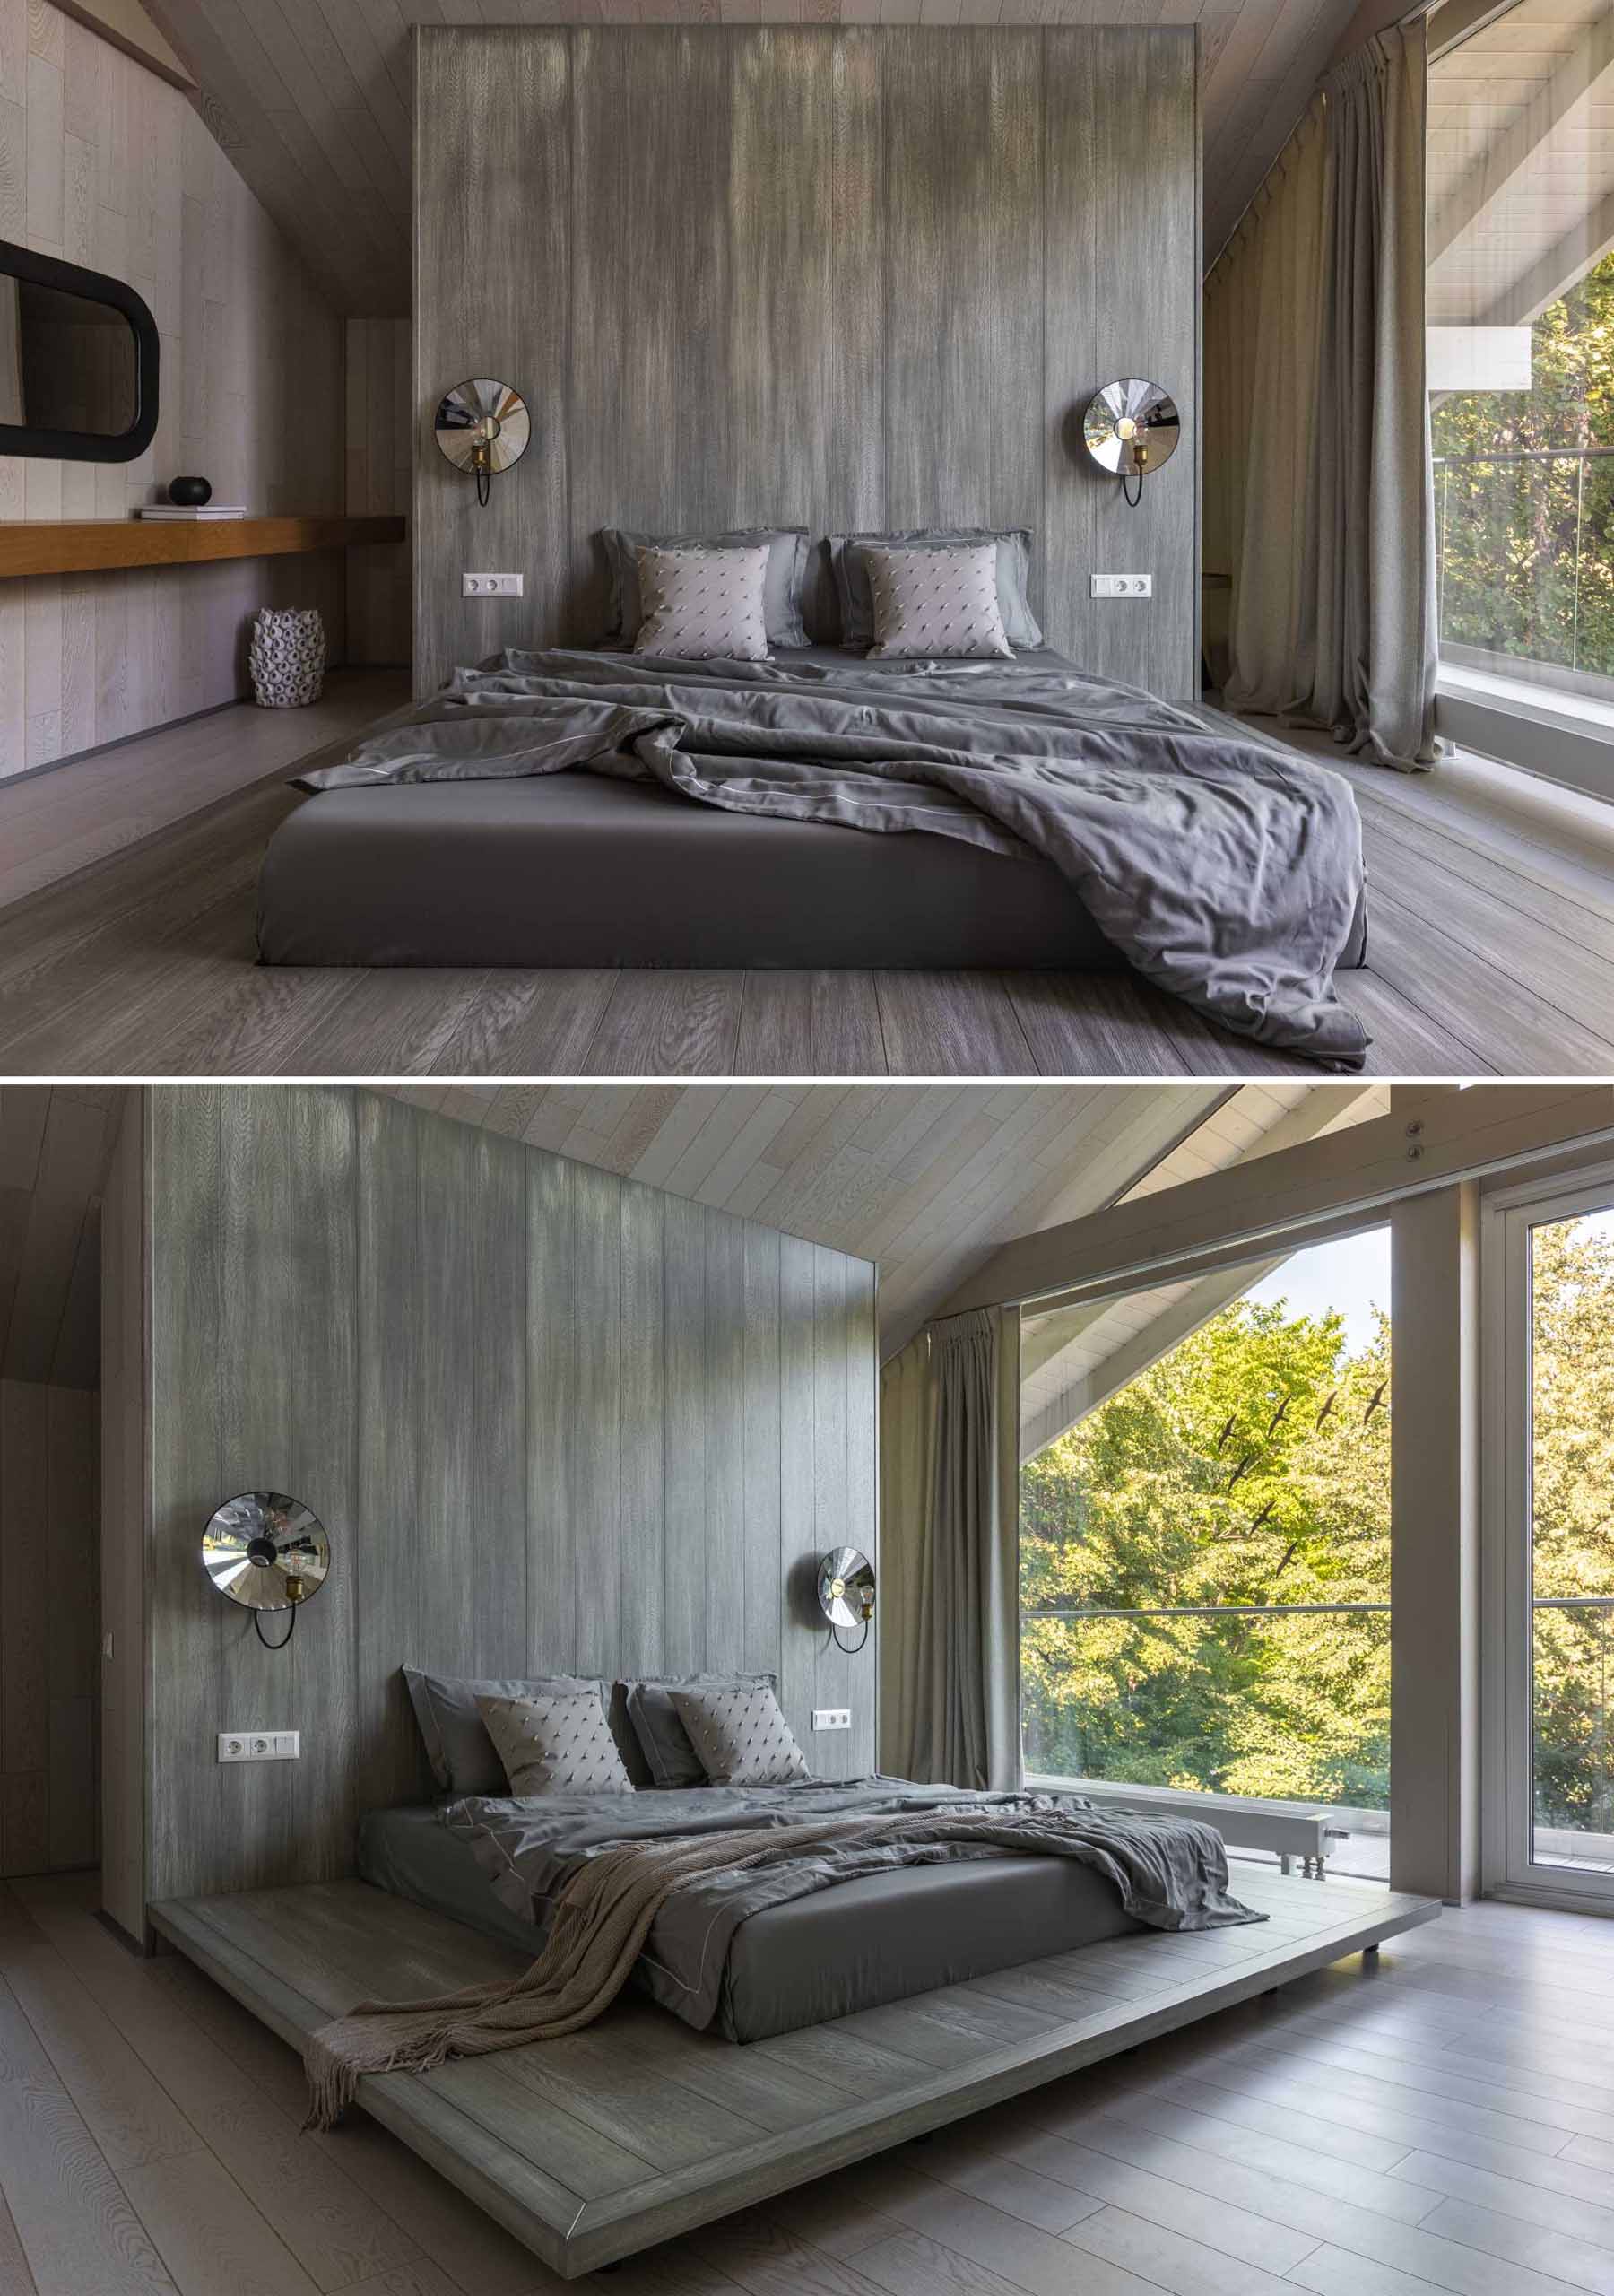 In this contemporary bedroom.,the grey color palette contrasts the lighter areas of the home, while floor-to-ceiling windows fill the room with ample natural light.